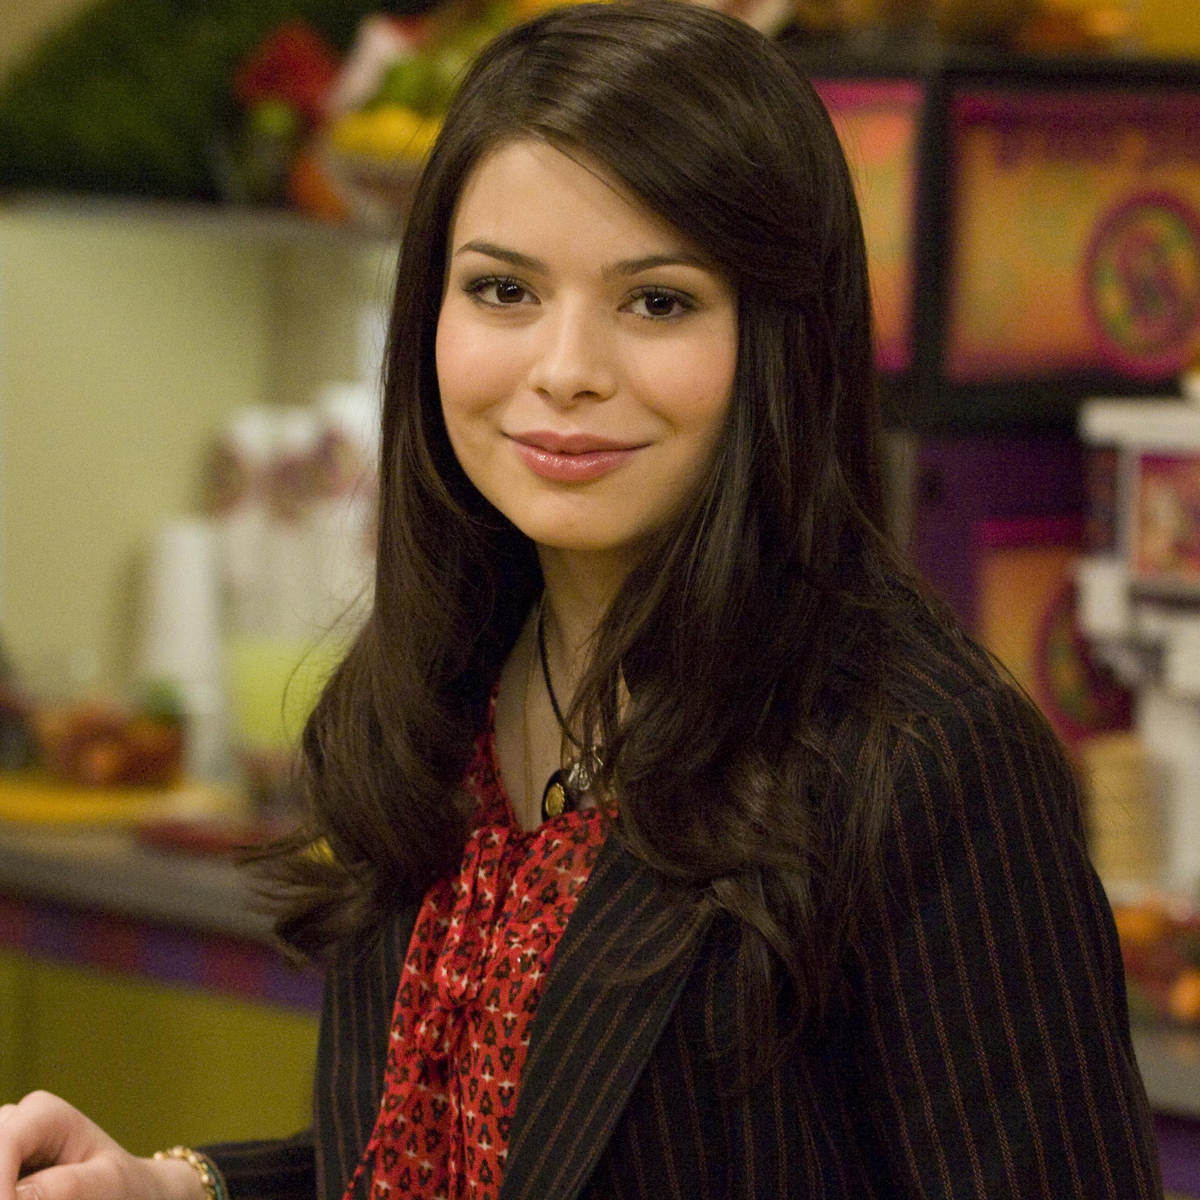 https://akns-images.eonline.com/eol_images/Entire_Site/202125/rs_1200x1200-210305104741-1200-Miranda_Cosgrove-iCarly-gj.jpg?fit=around%7C1200:1200&output-quality=90&crop=1200:1200;center,top